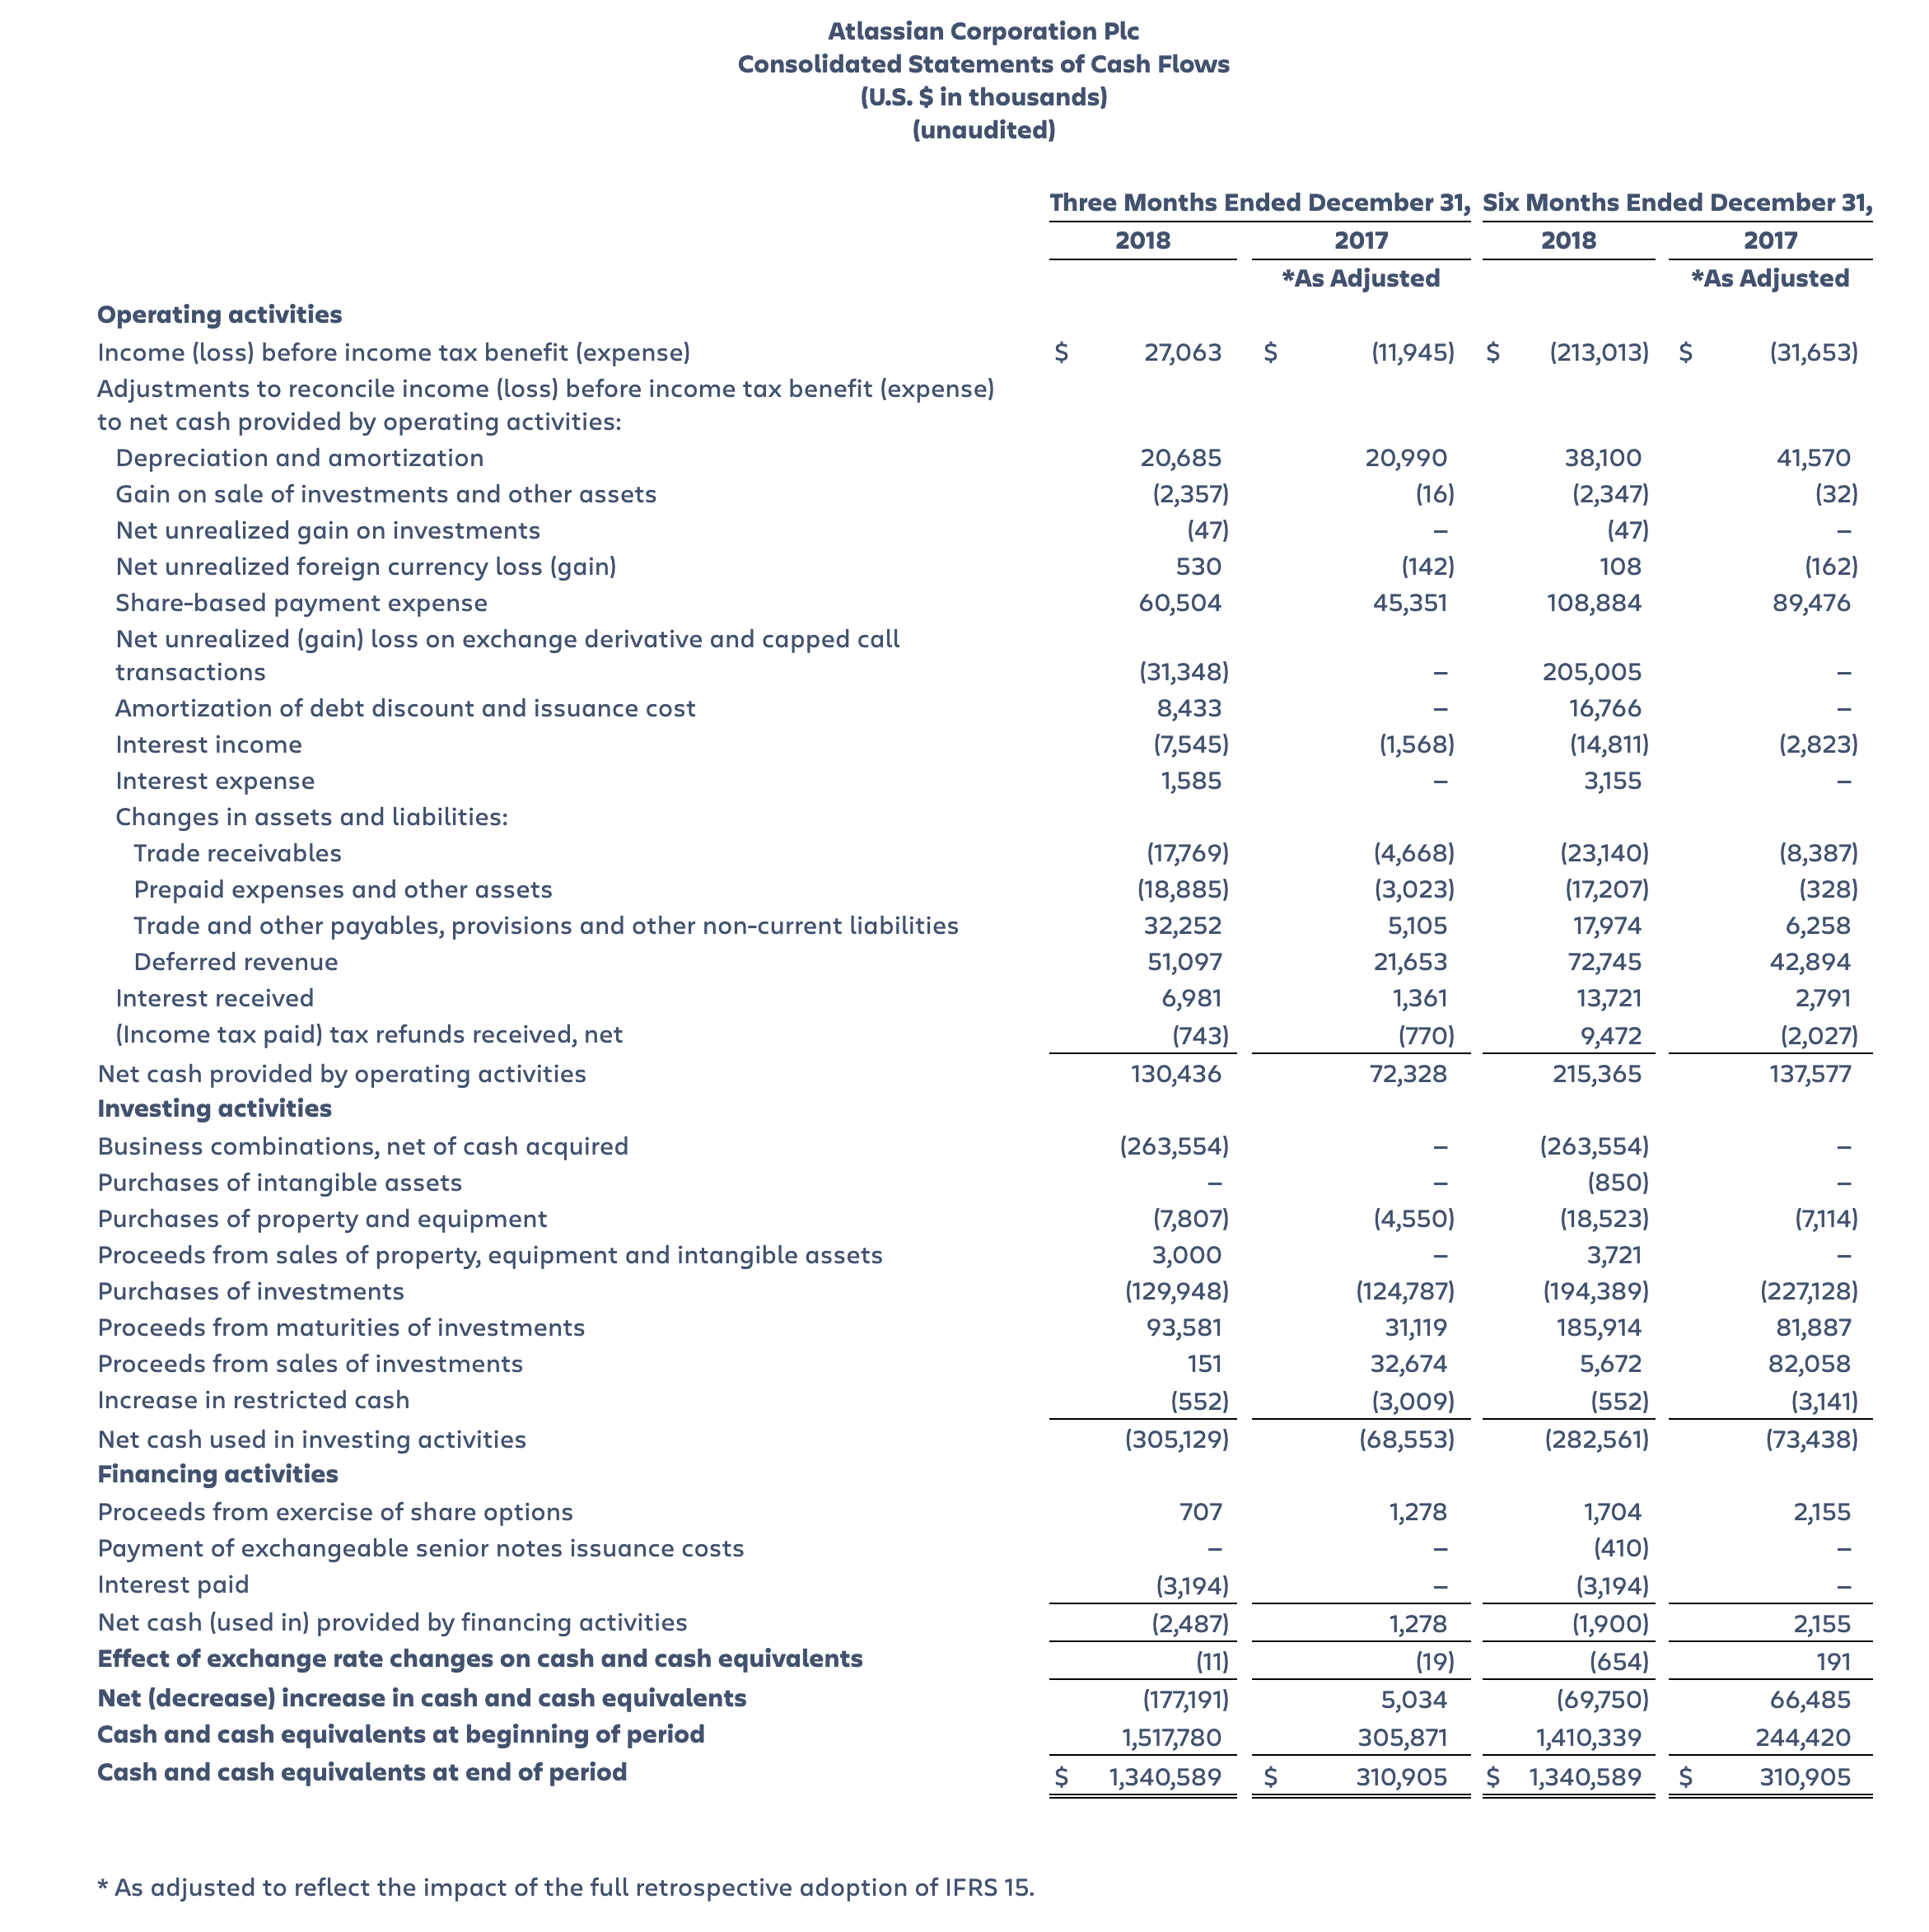 Atlassian Consolidated Statements of Cash Flow, Second Quarter Fiscal Year 2019